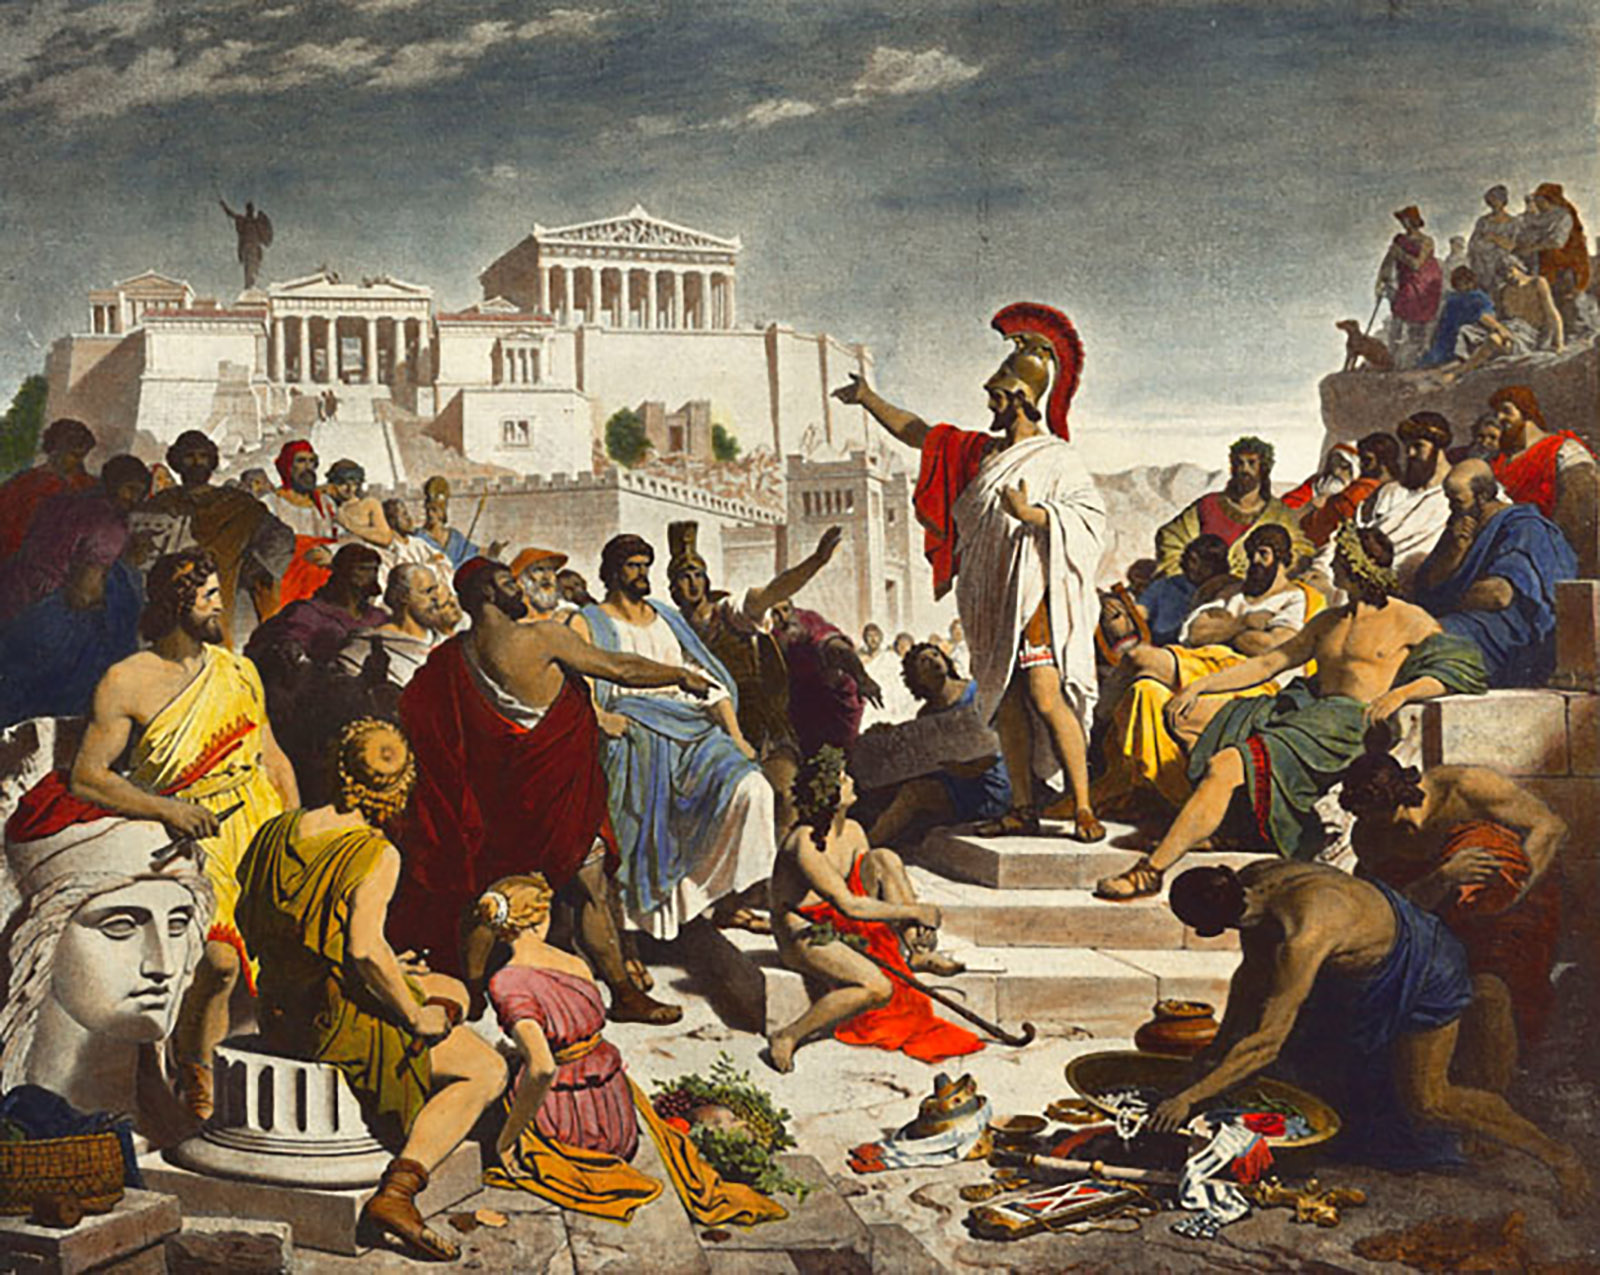 Philipp Foltz: Pericles’s Funeral Oration, 1877